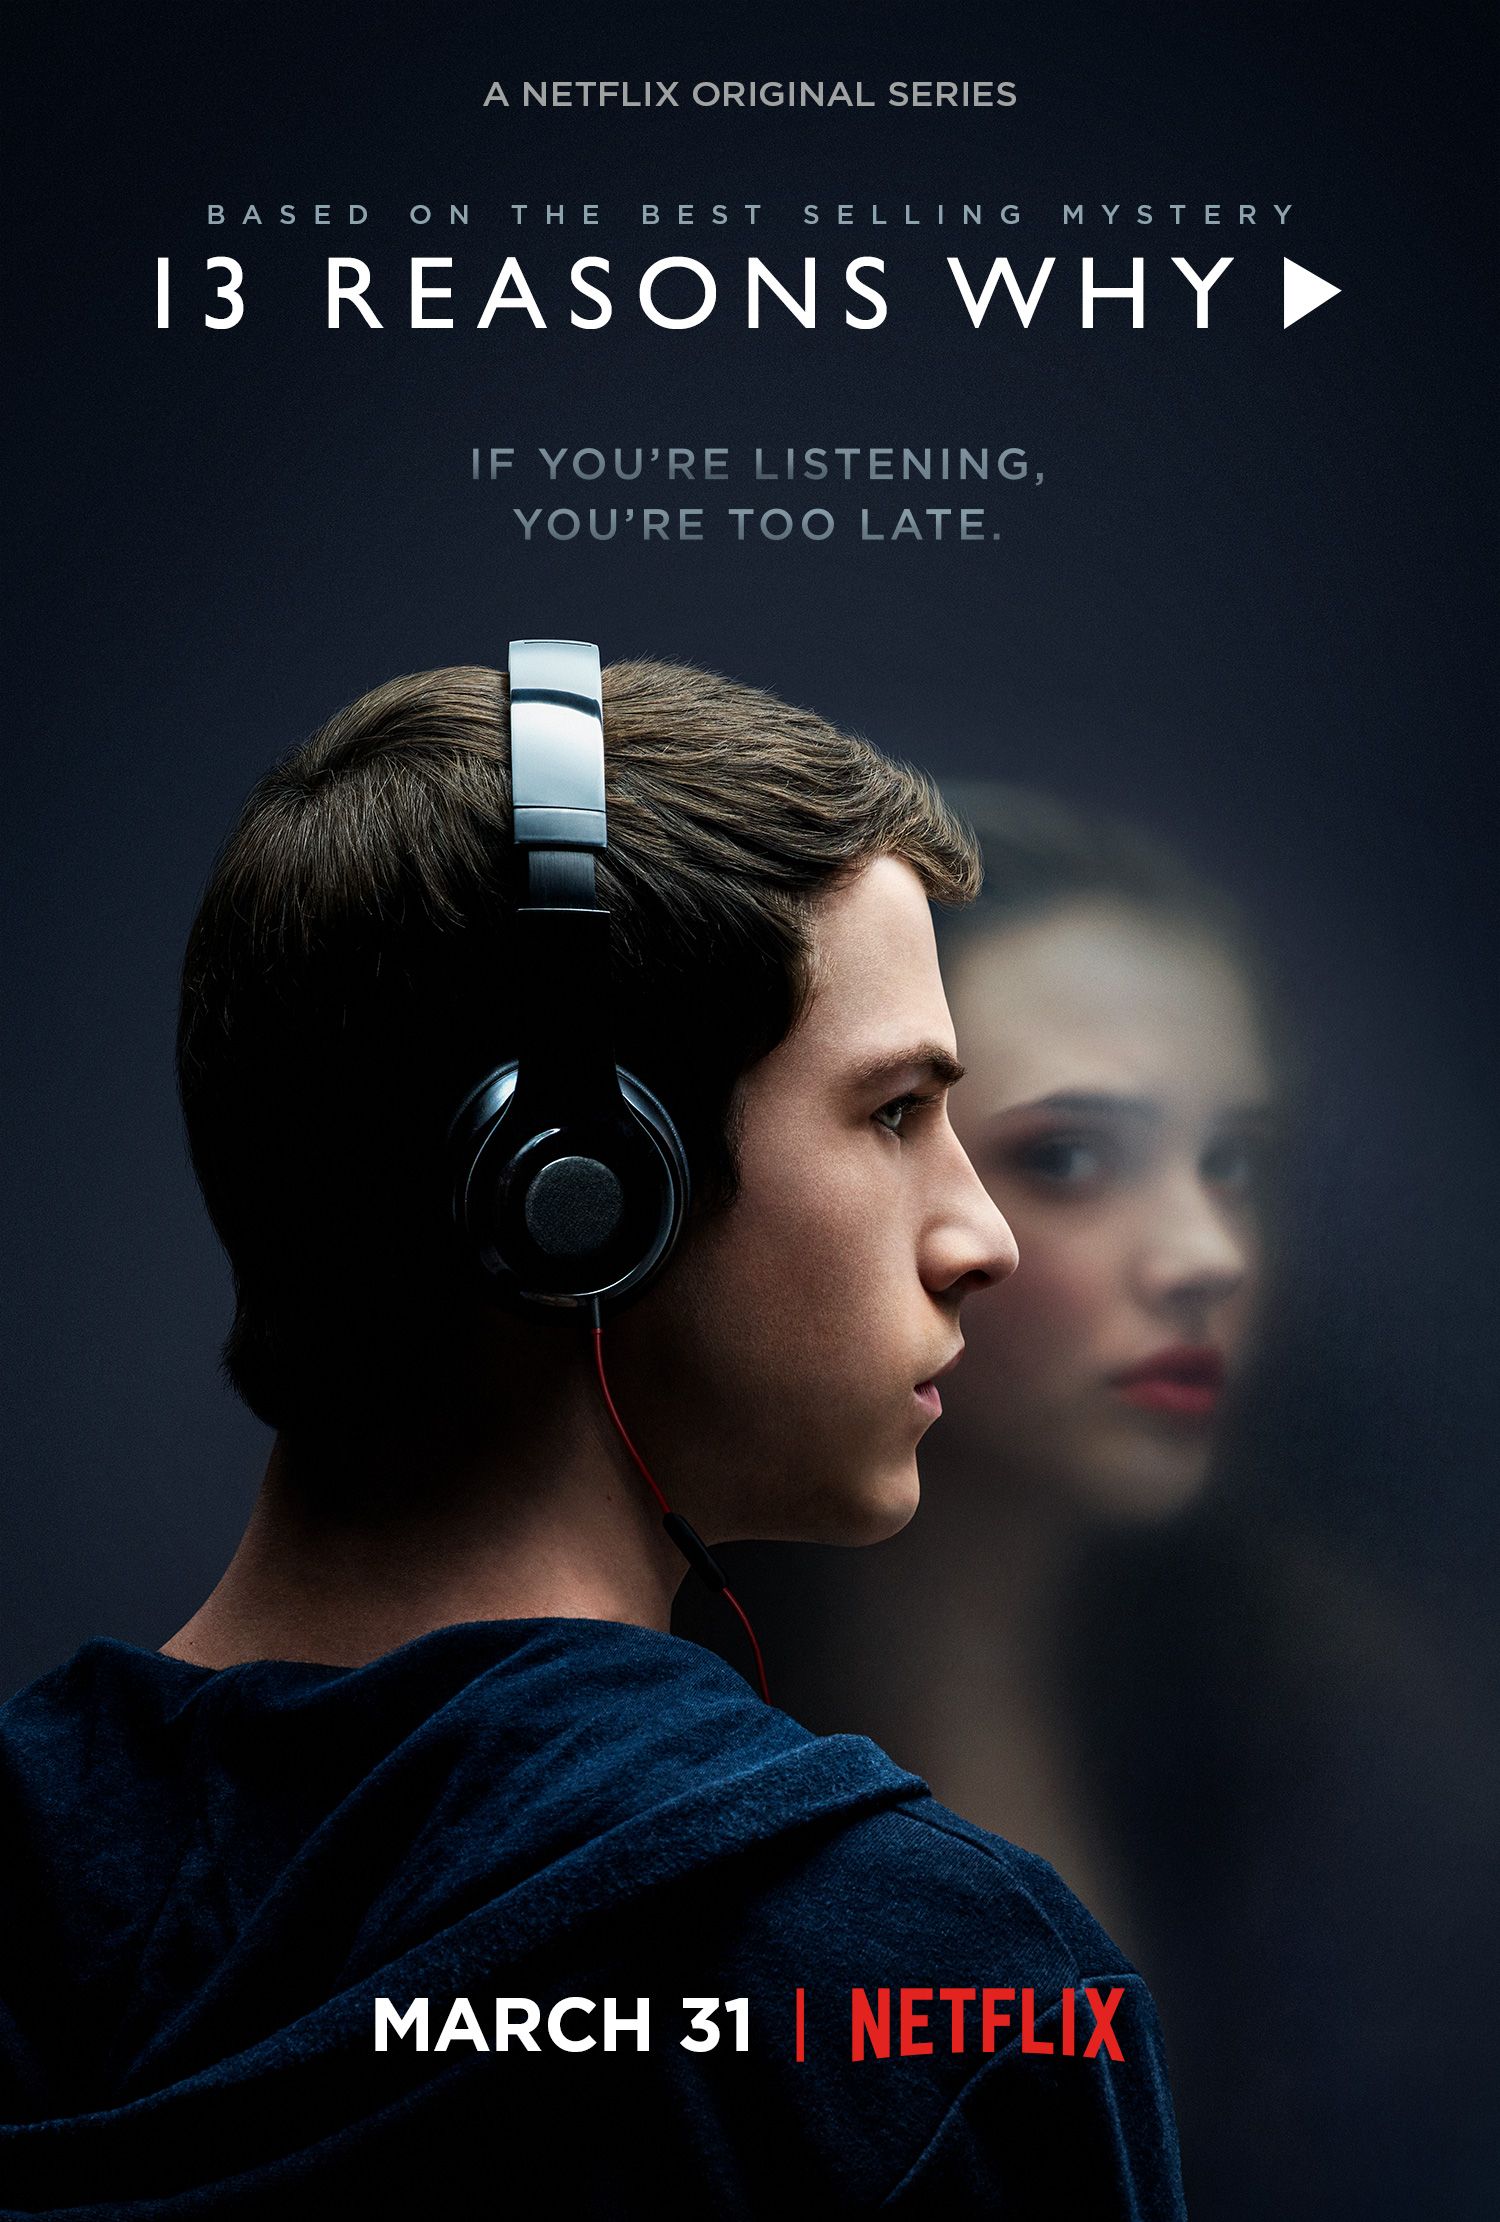 13 Reasons Why Netflix Poster